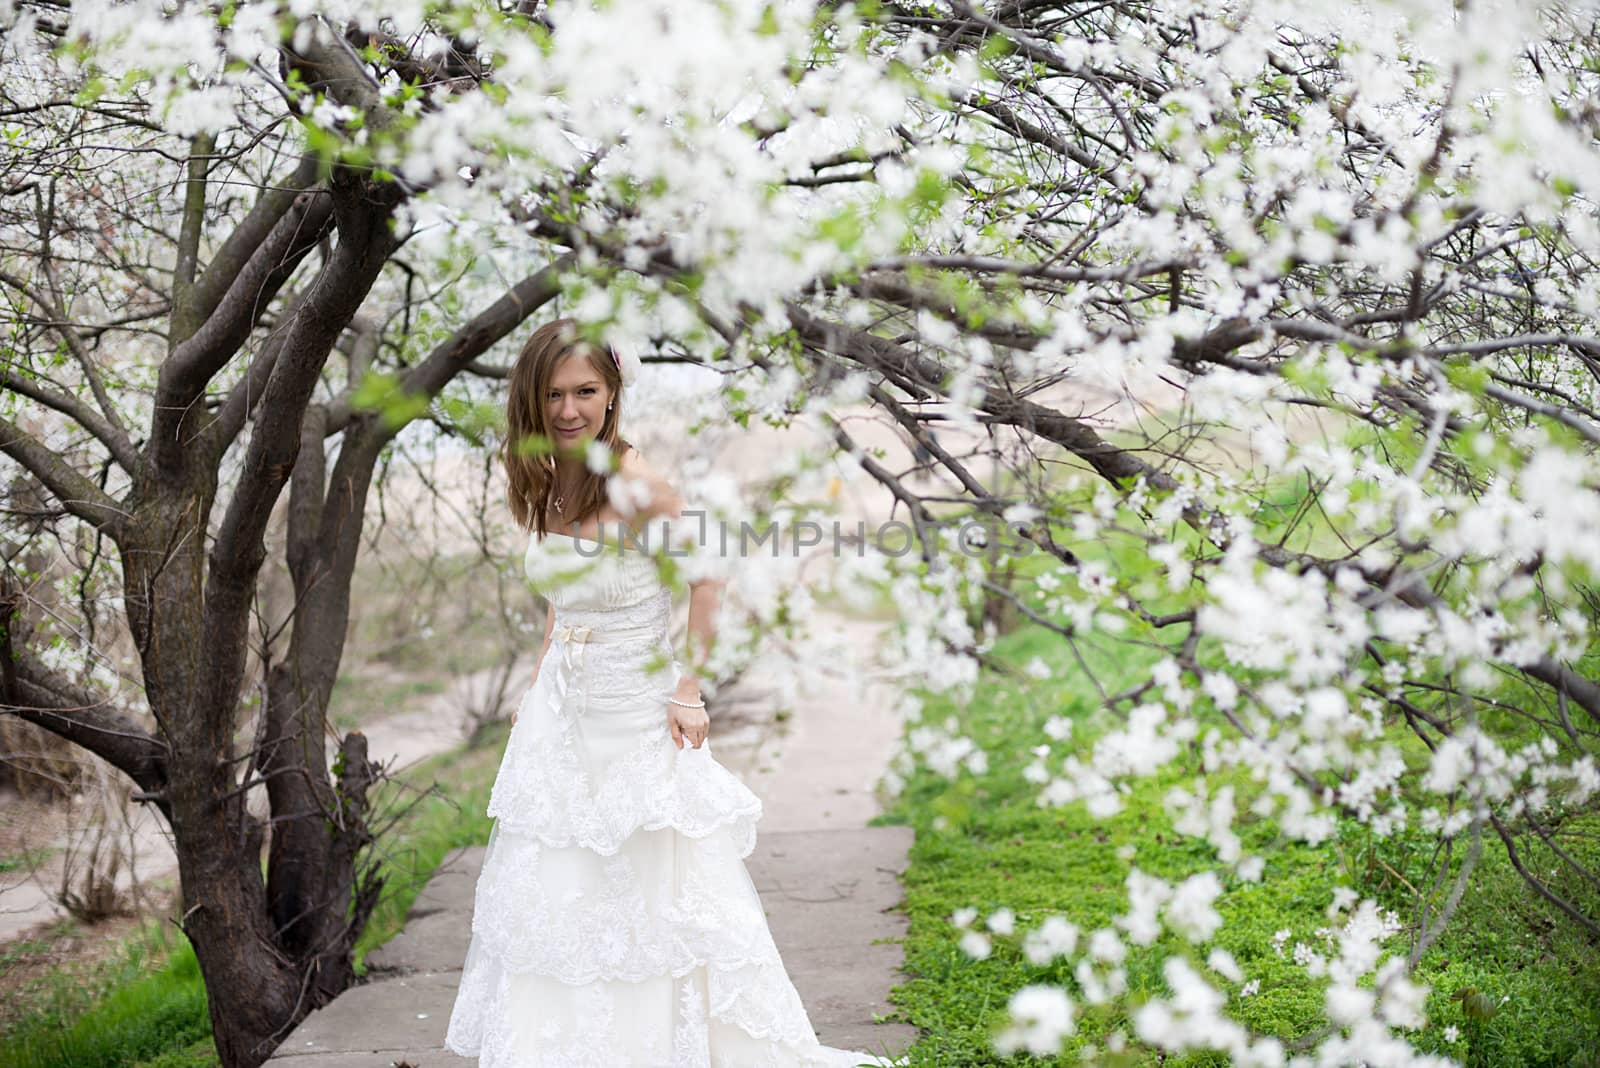 Portrait of beautiful blond bride in spring blossom